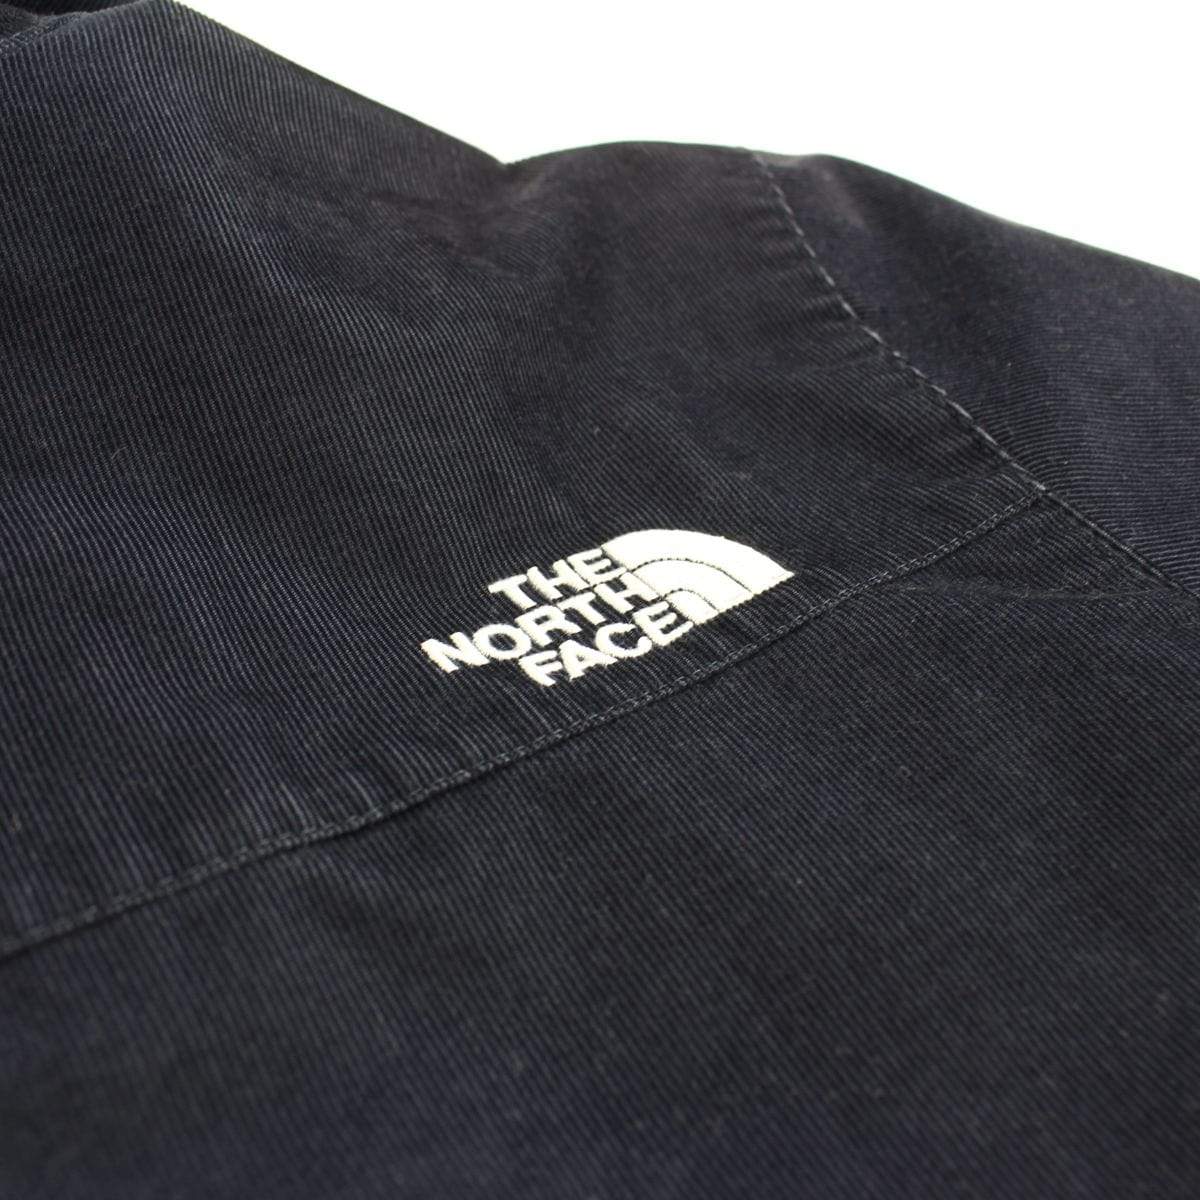 Supreme x TNF the north face corduroy Navy - SaruGeneral